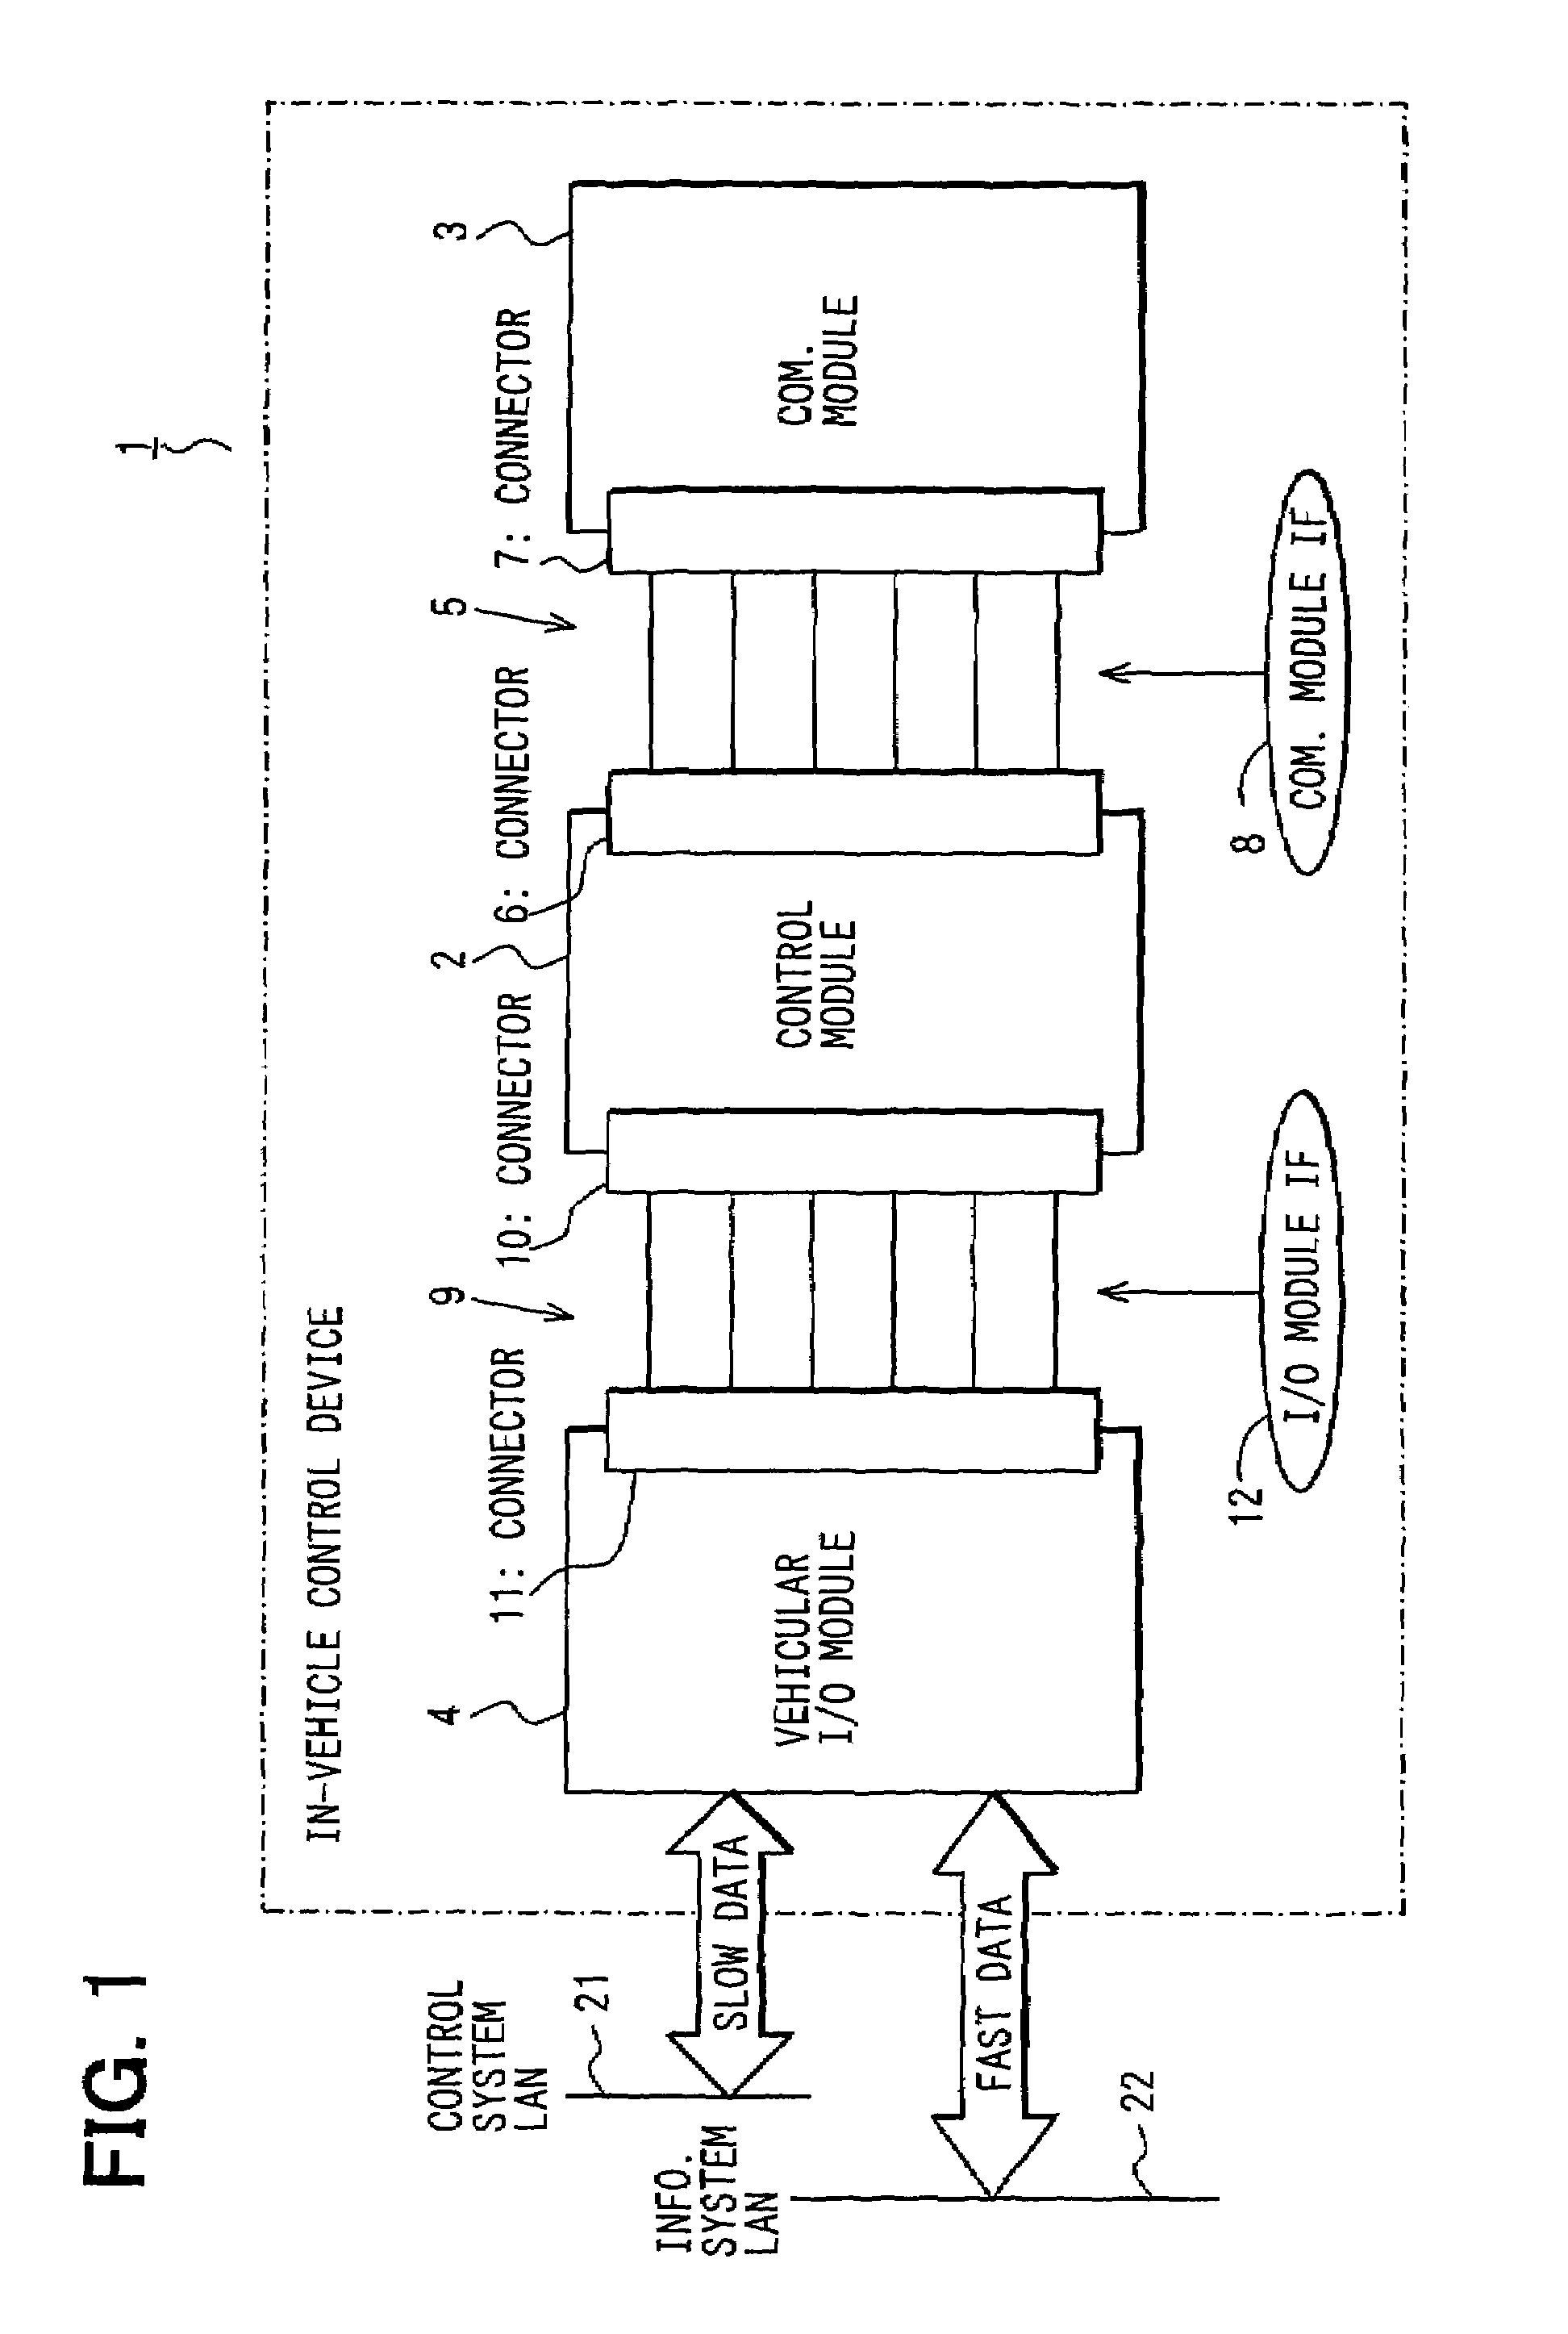 In-vehicle control device communicatable with external communication system and in-vehicle LAN